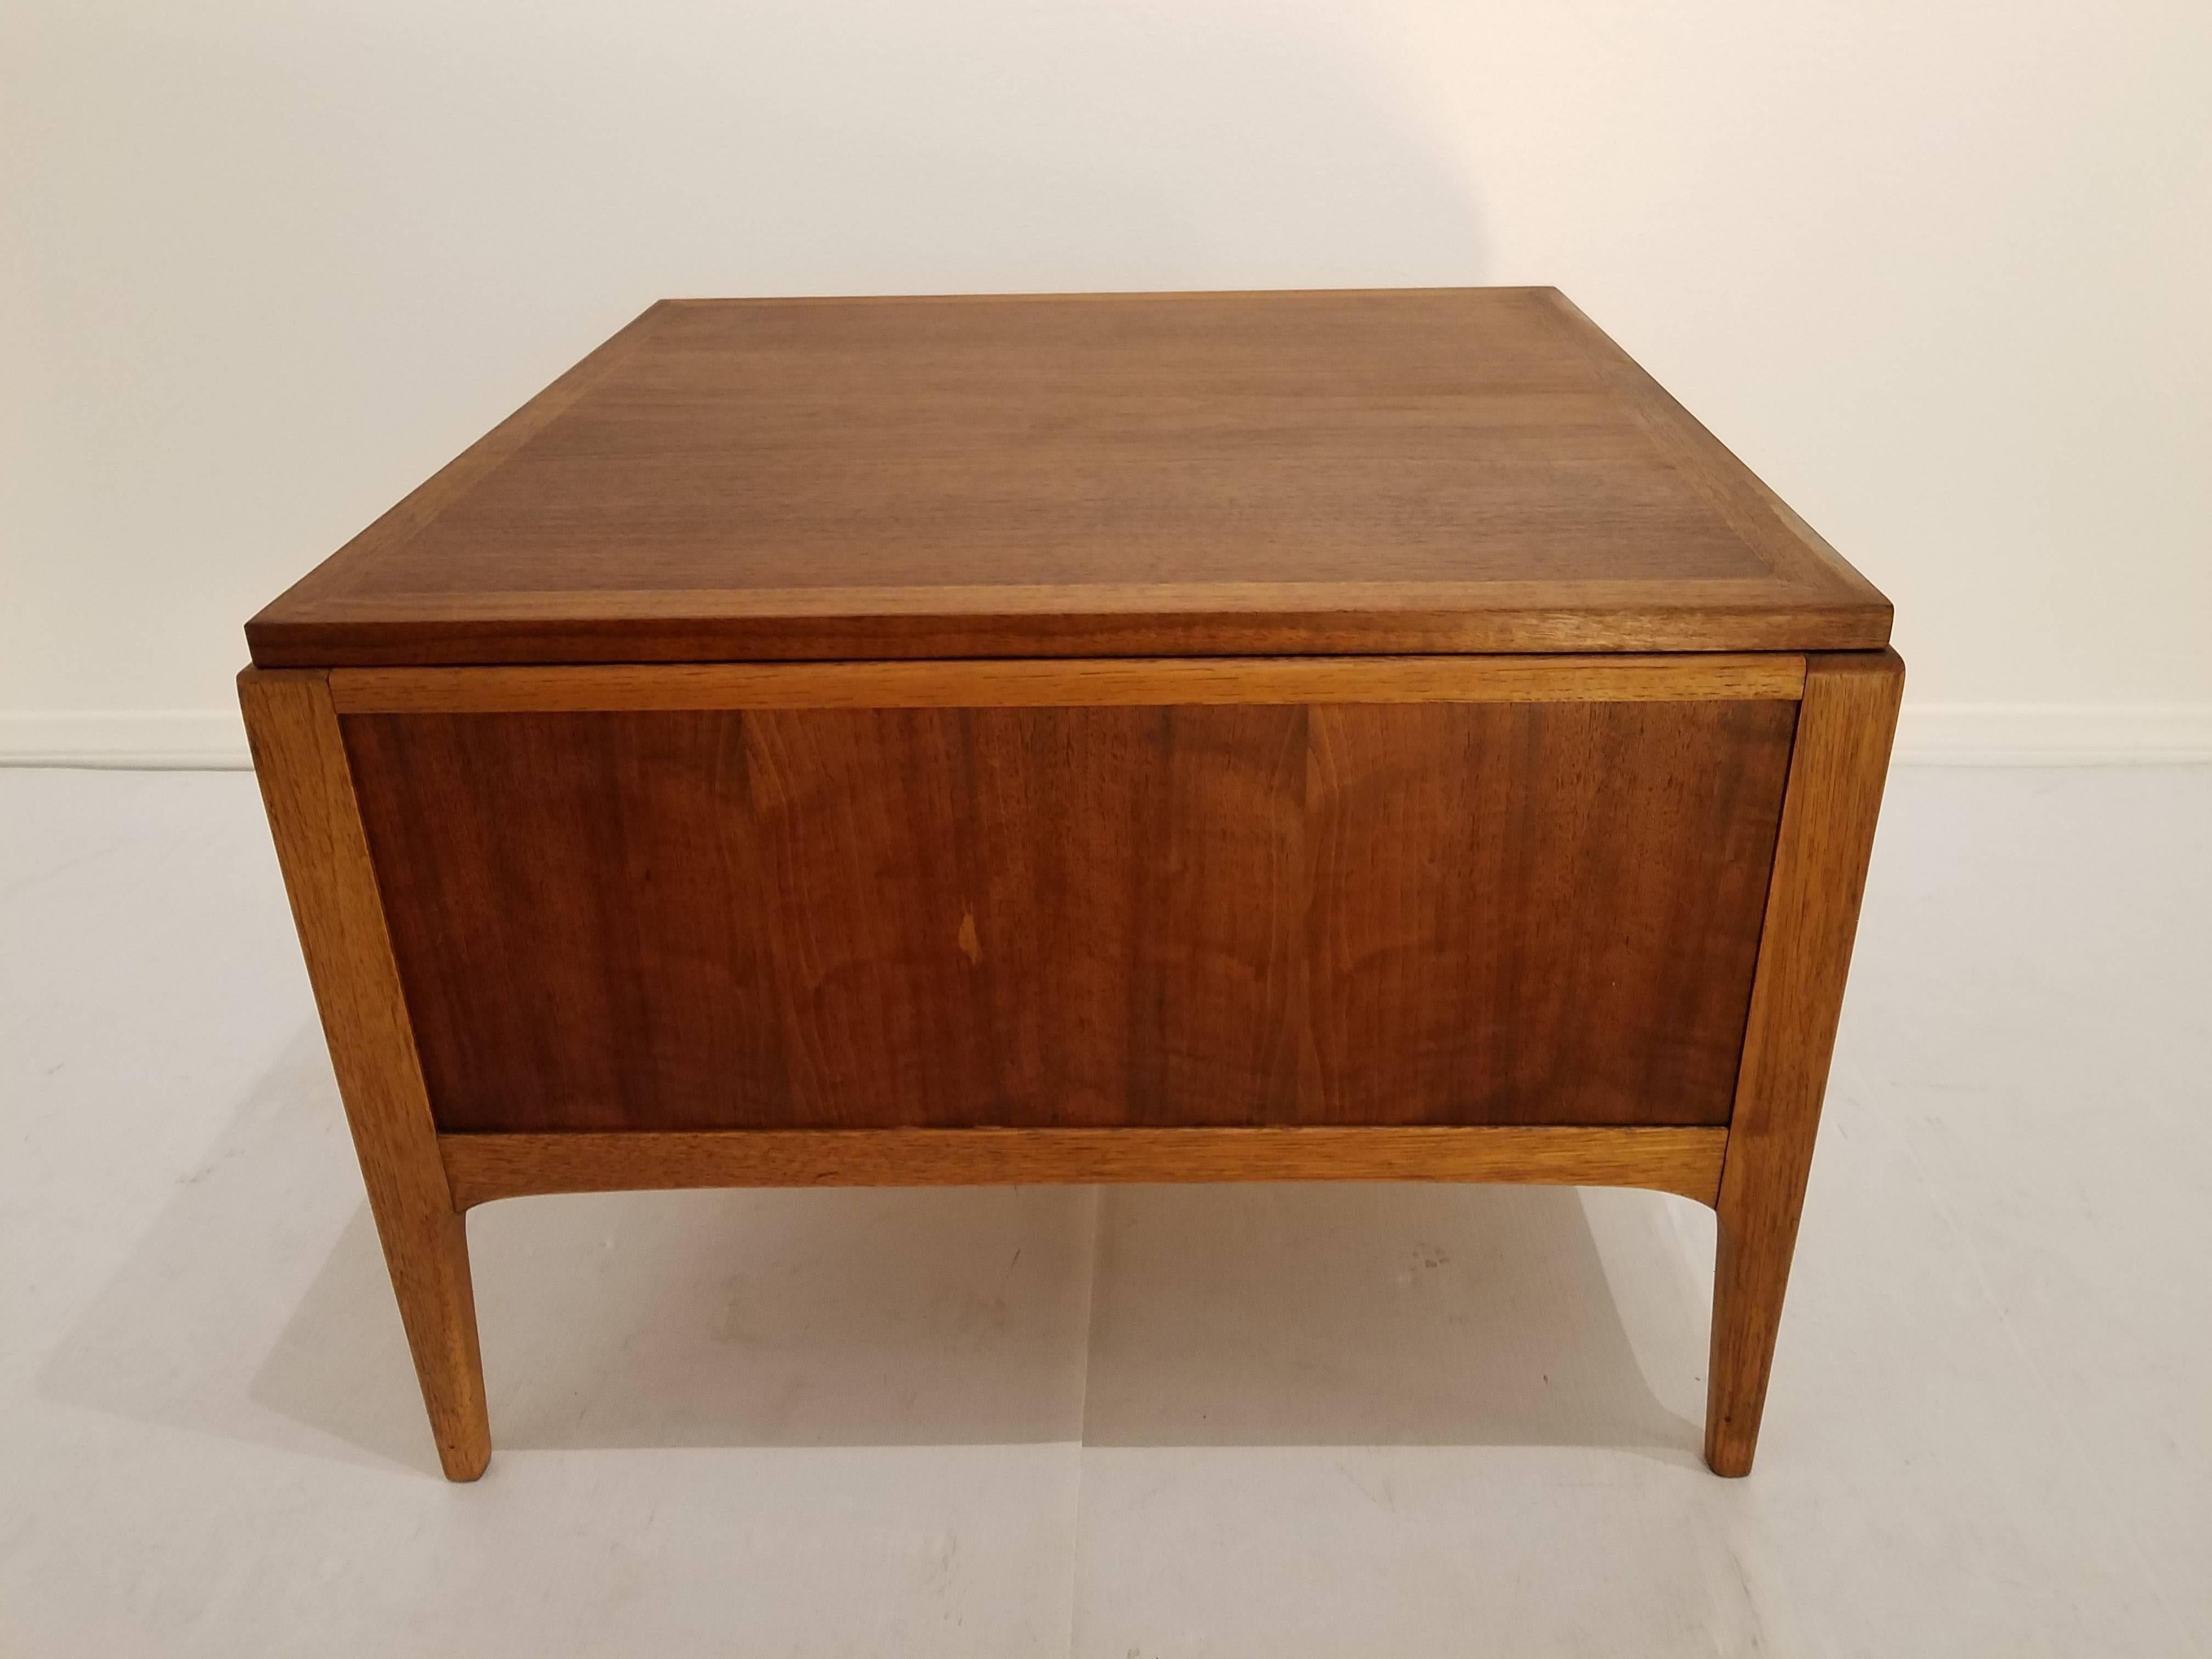 20th Century American Mid-Century Modern Square End Table Cabinet by Lane